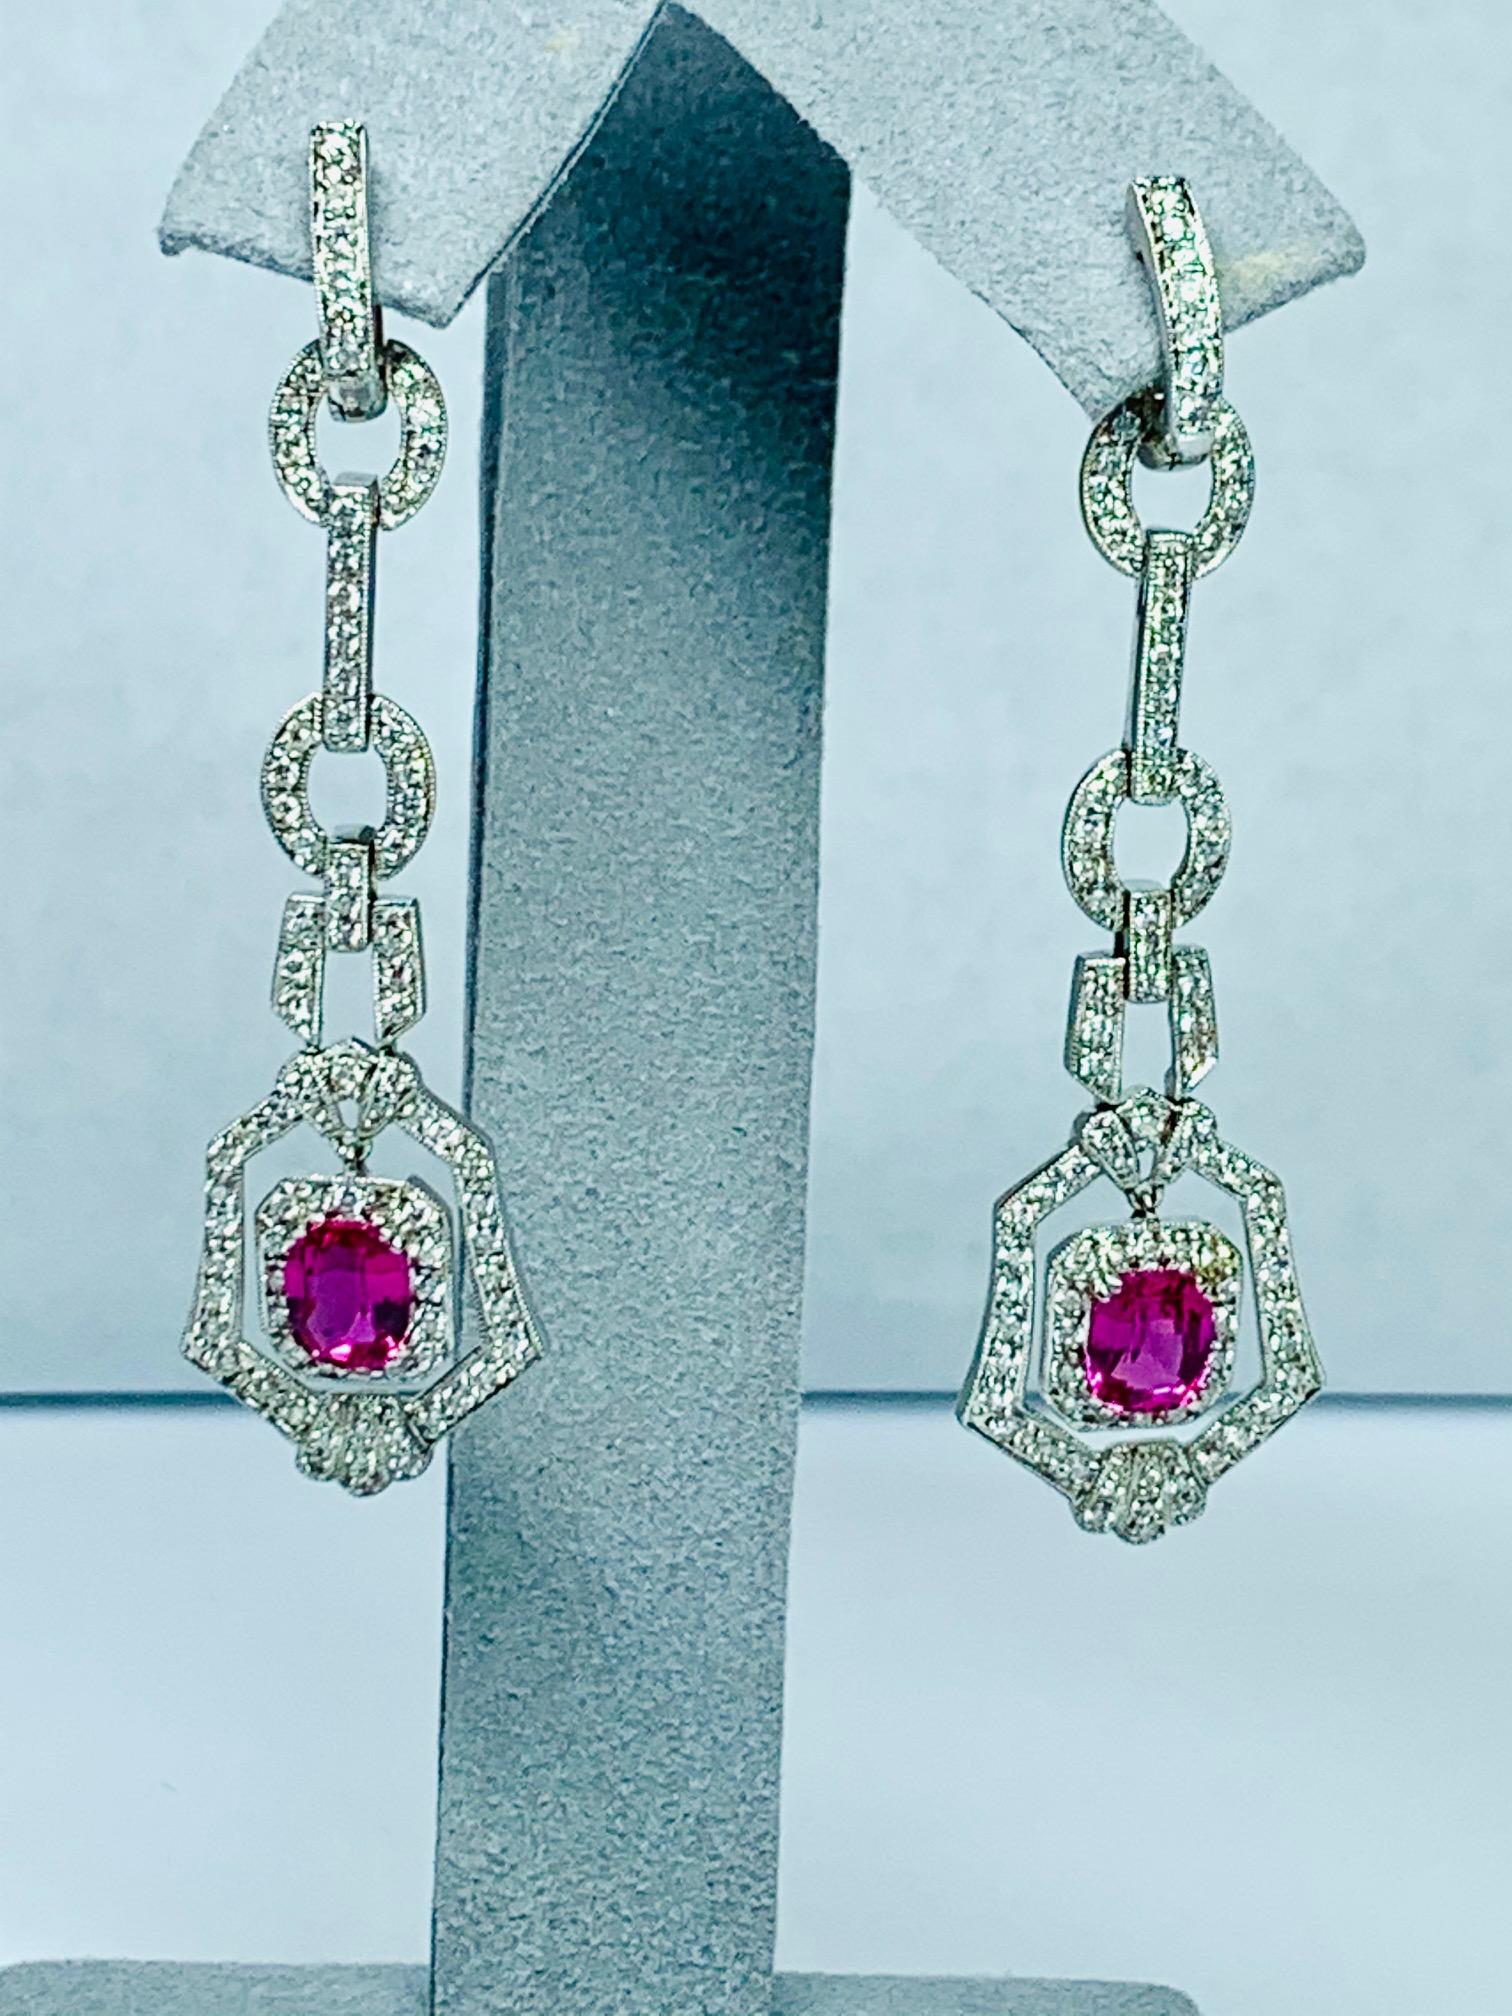 2.90 Carat cushion pink sapphire, heat , set in 18k white gold chandelier /dangle style earrings surrounded with 2.0 carat of white Vs-si1 diamonds .